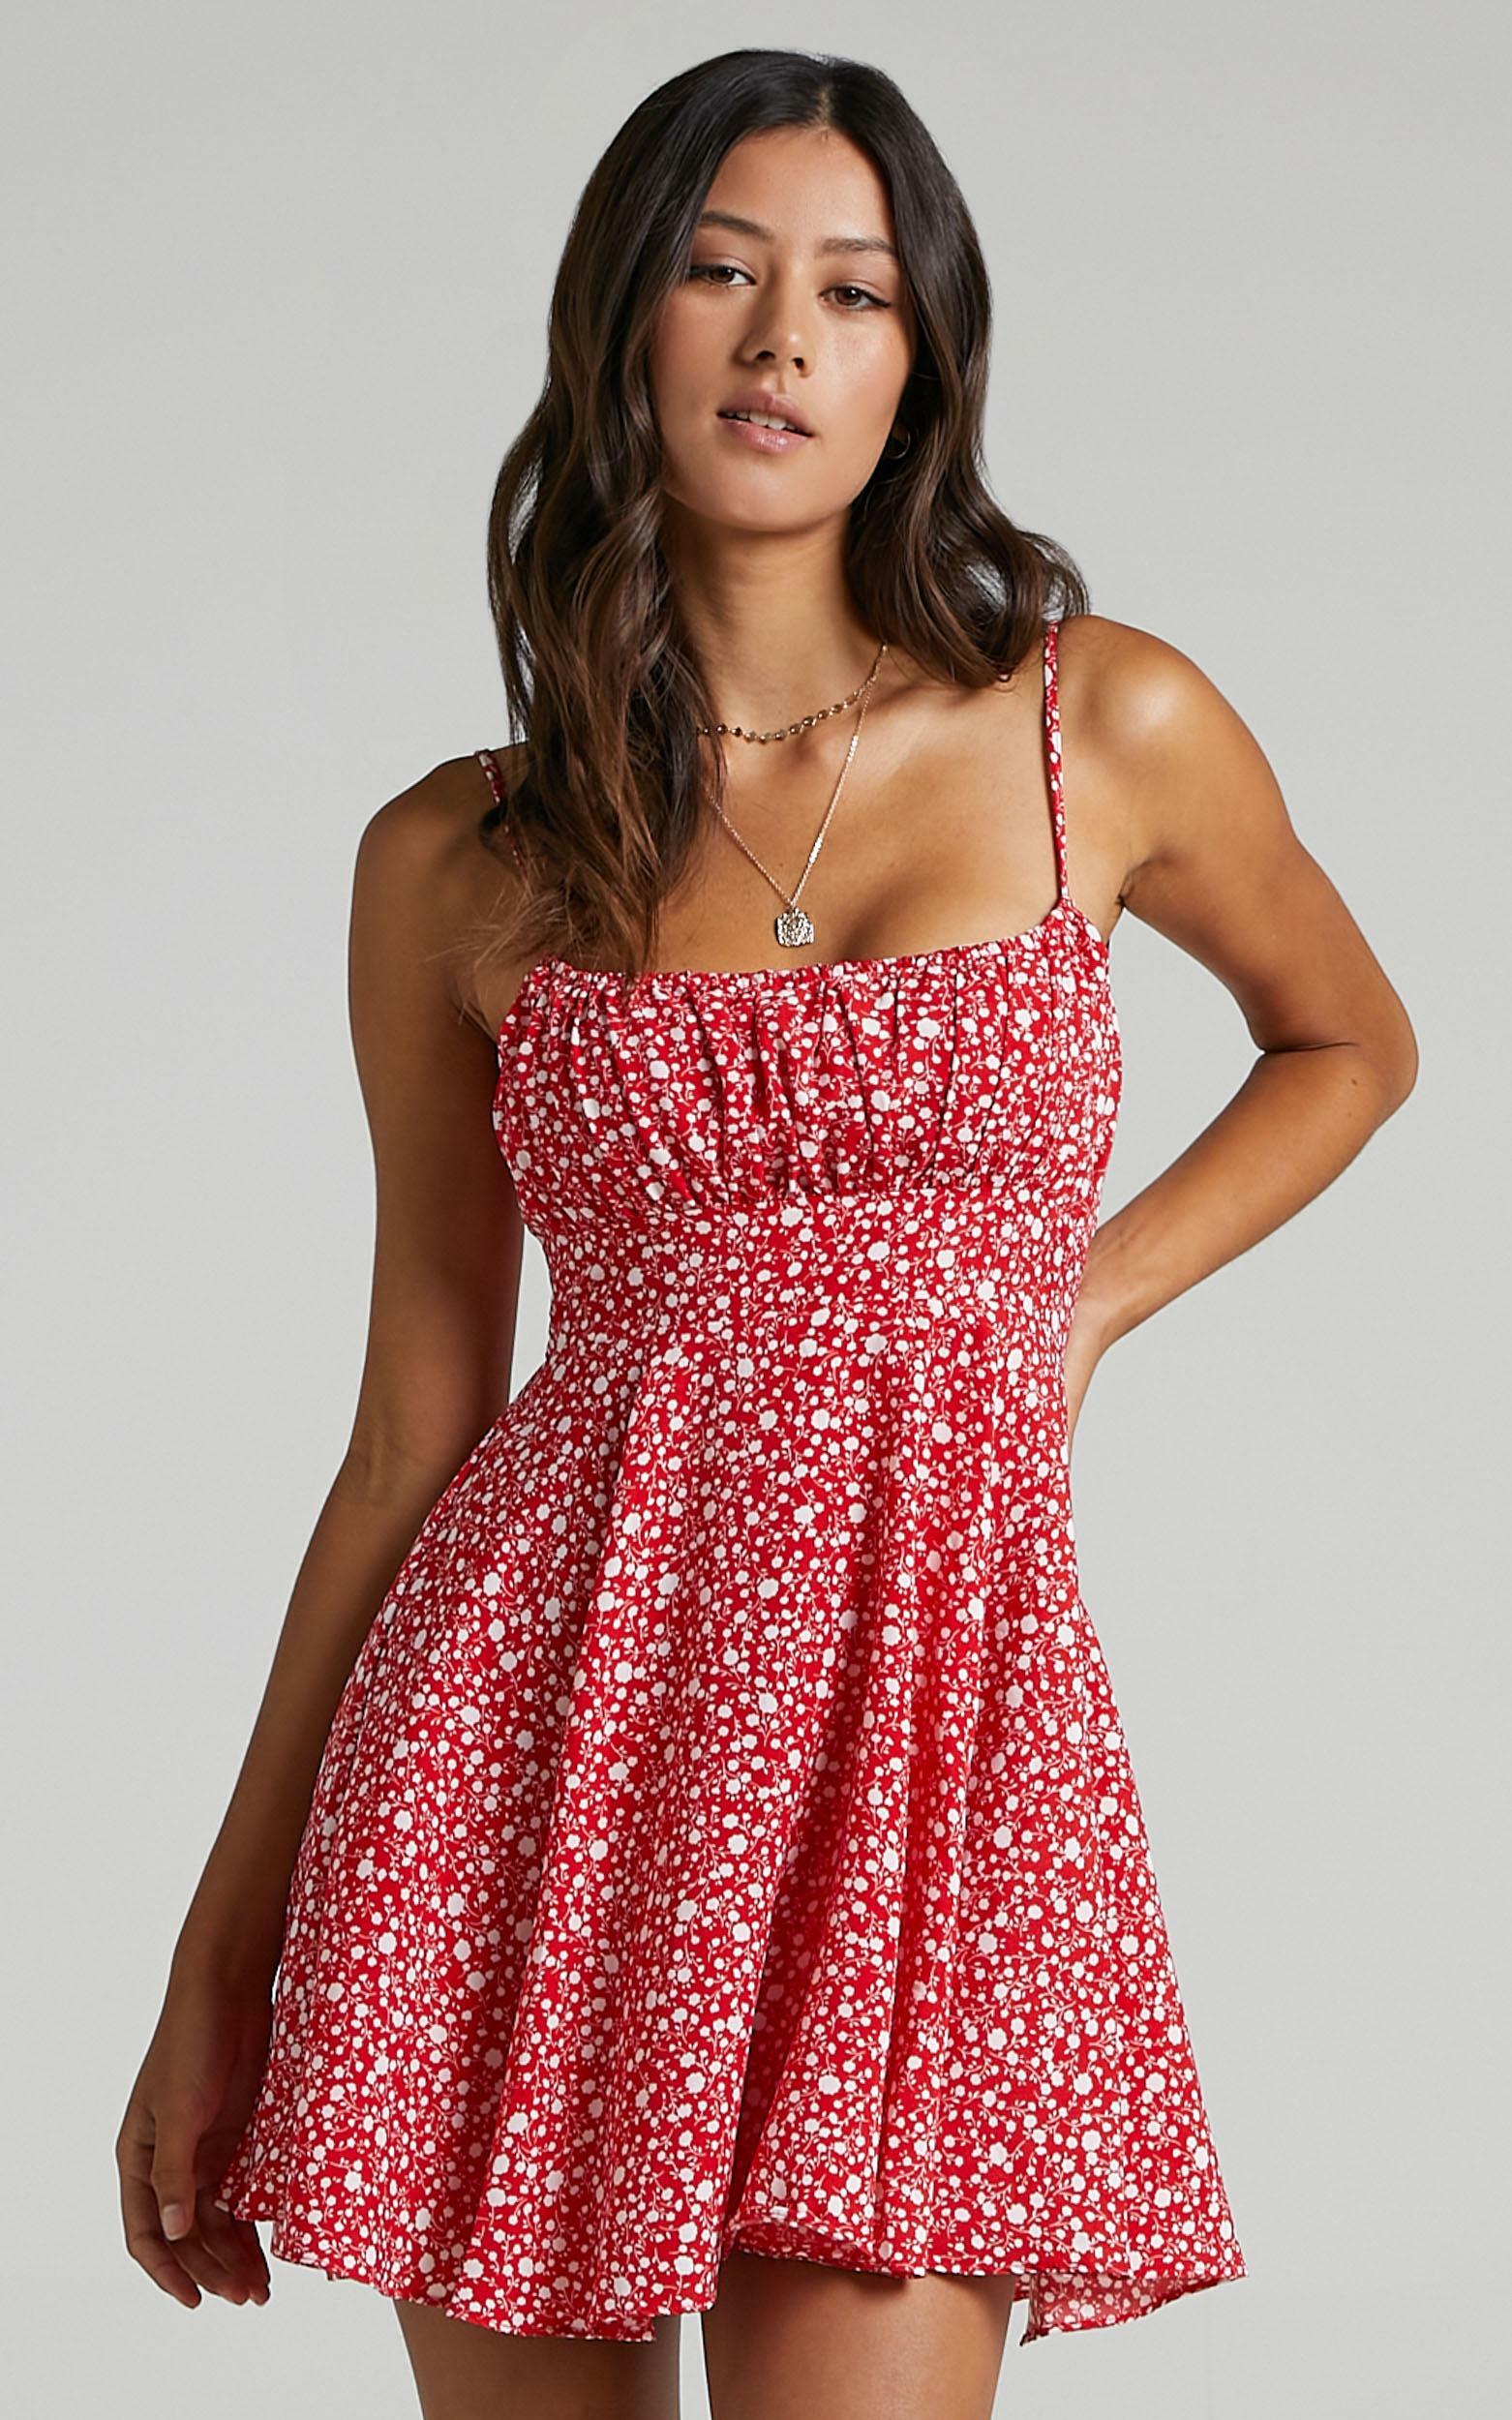 Summer Jam Sweetheart Mini Dress in Red Floral Print - 06, RED5, hi-res image number null